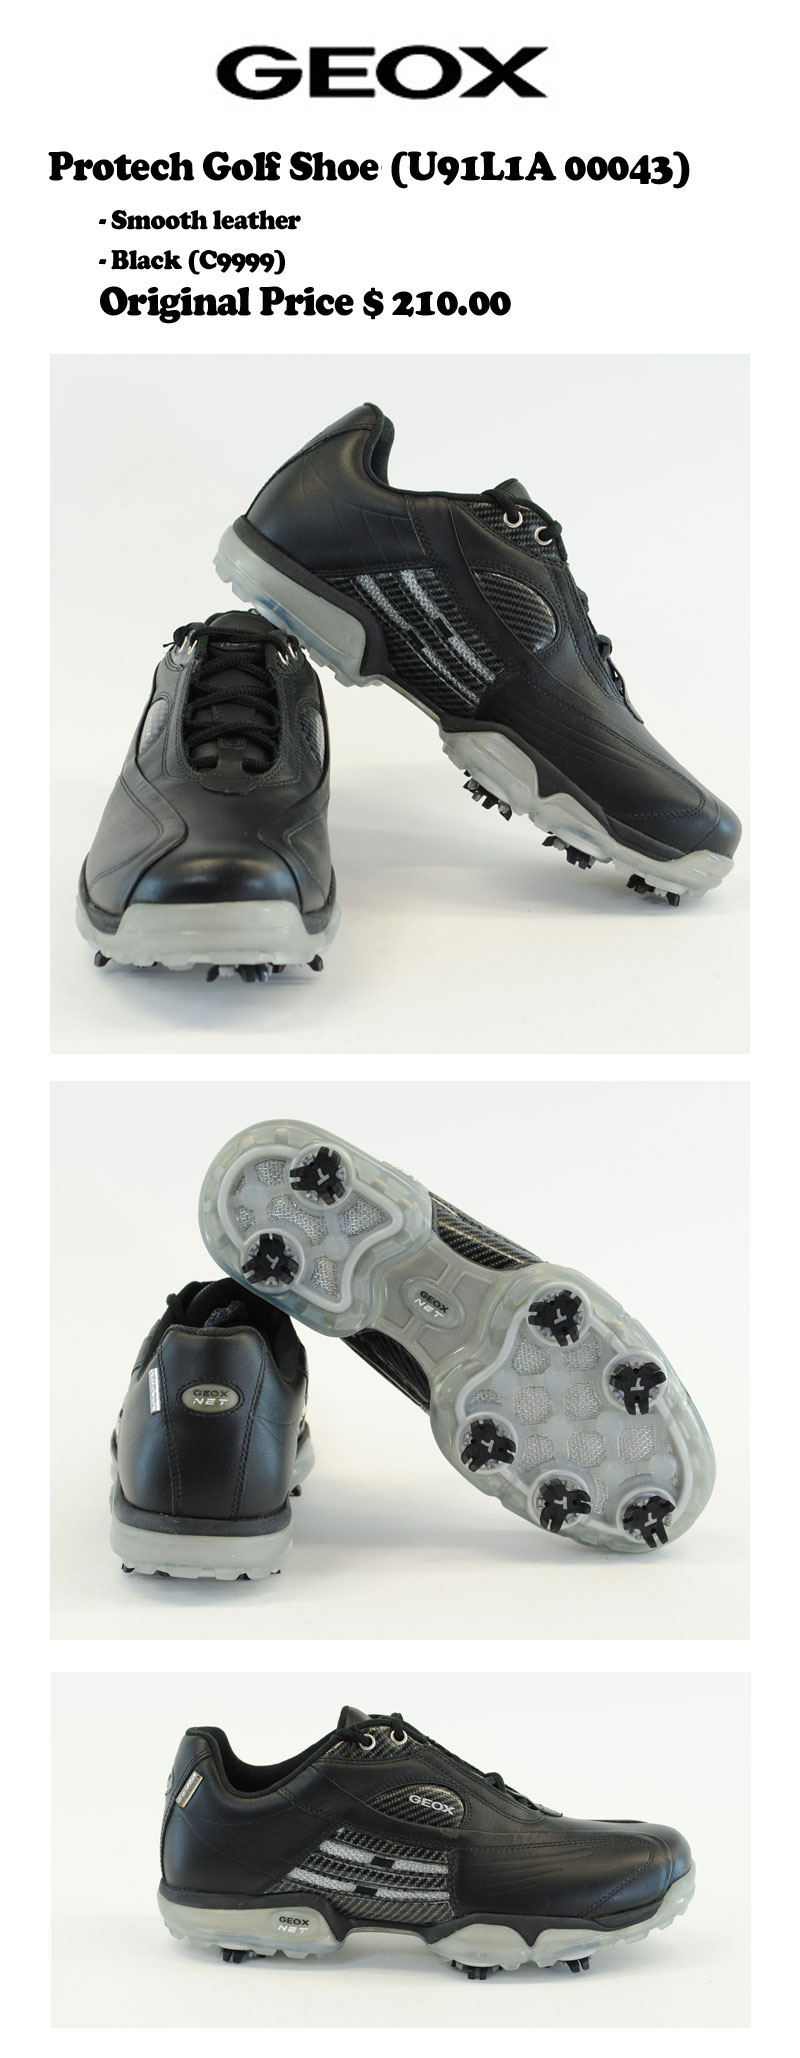 geox golf shoes